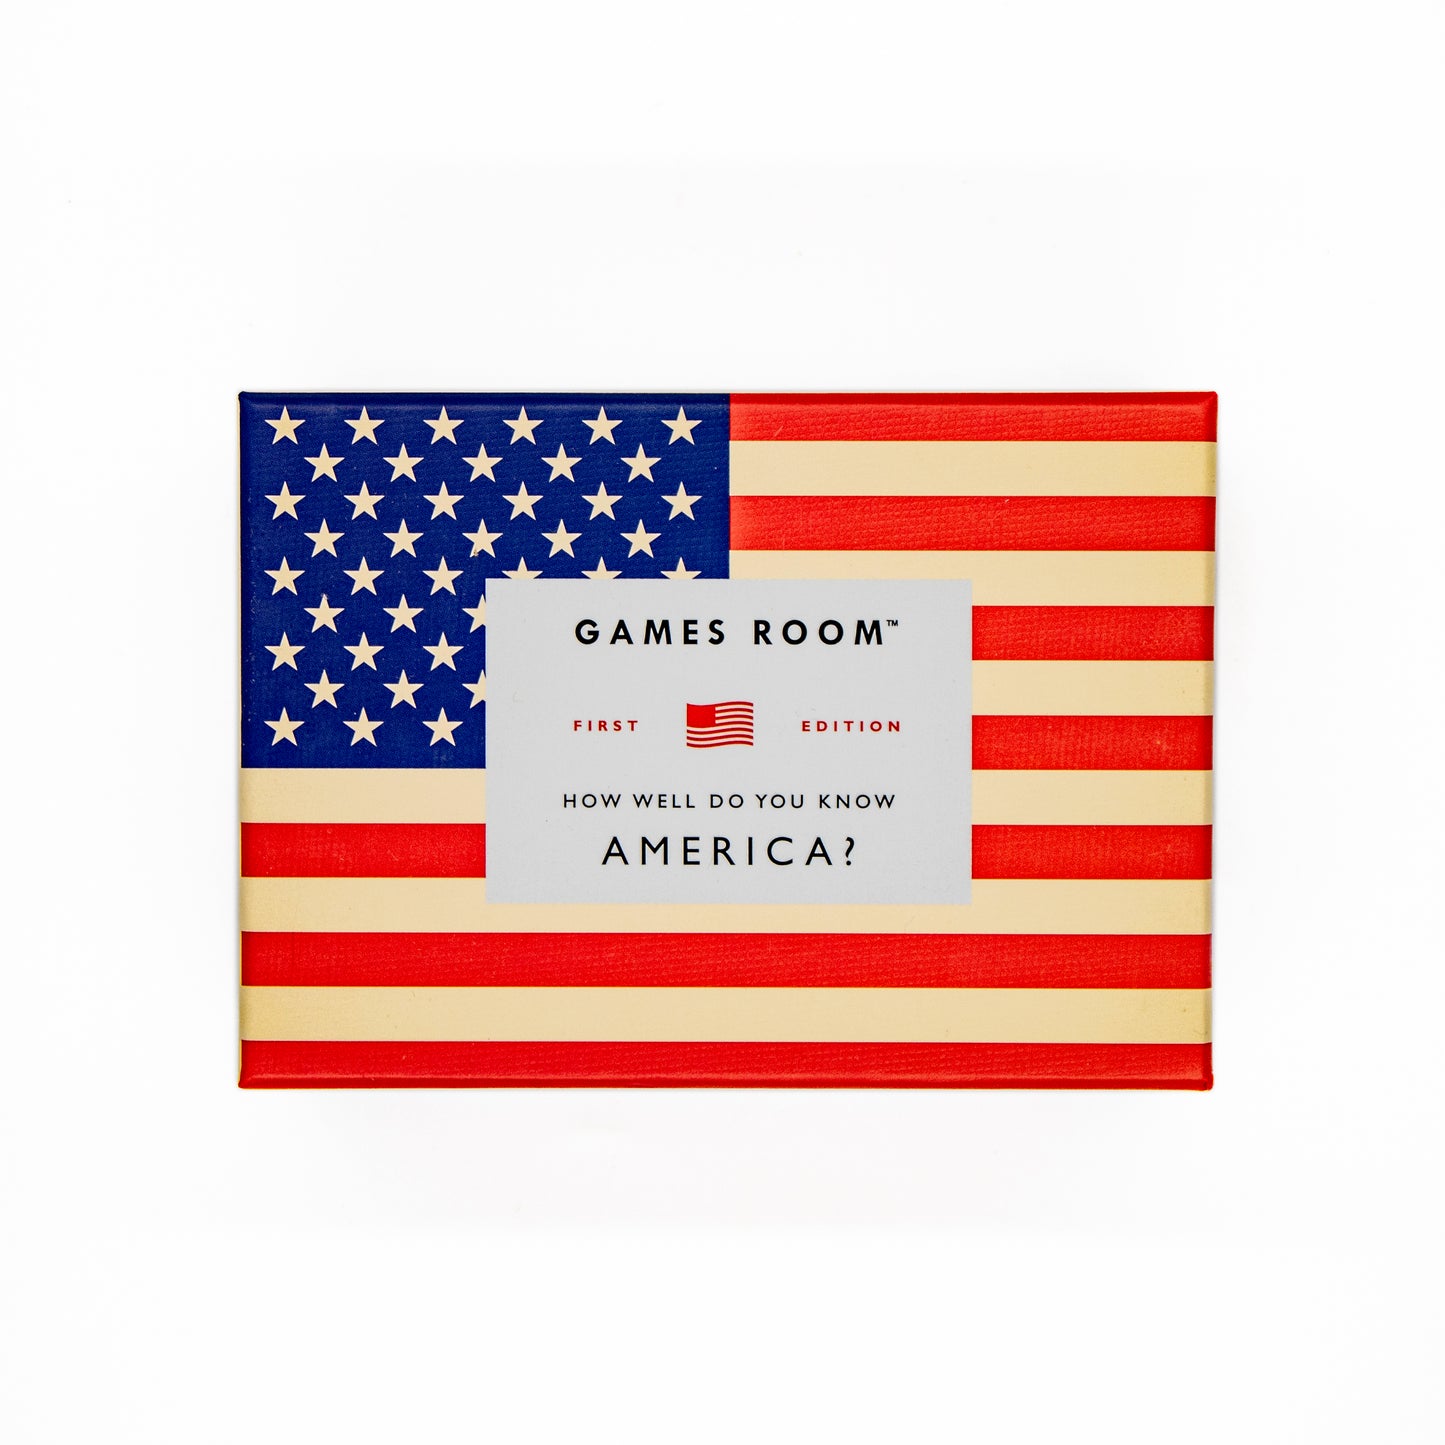 How Well Do You Know America? Card Game